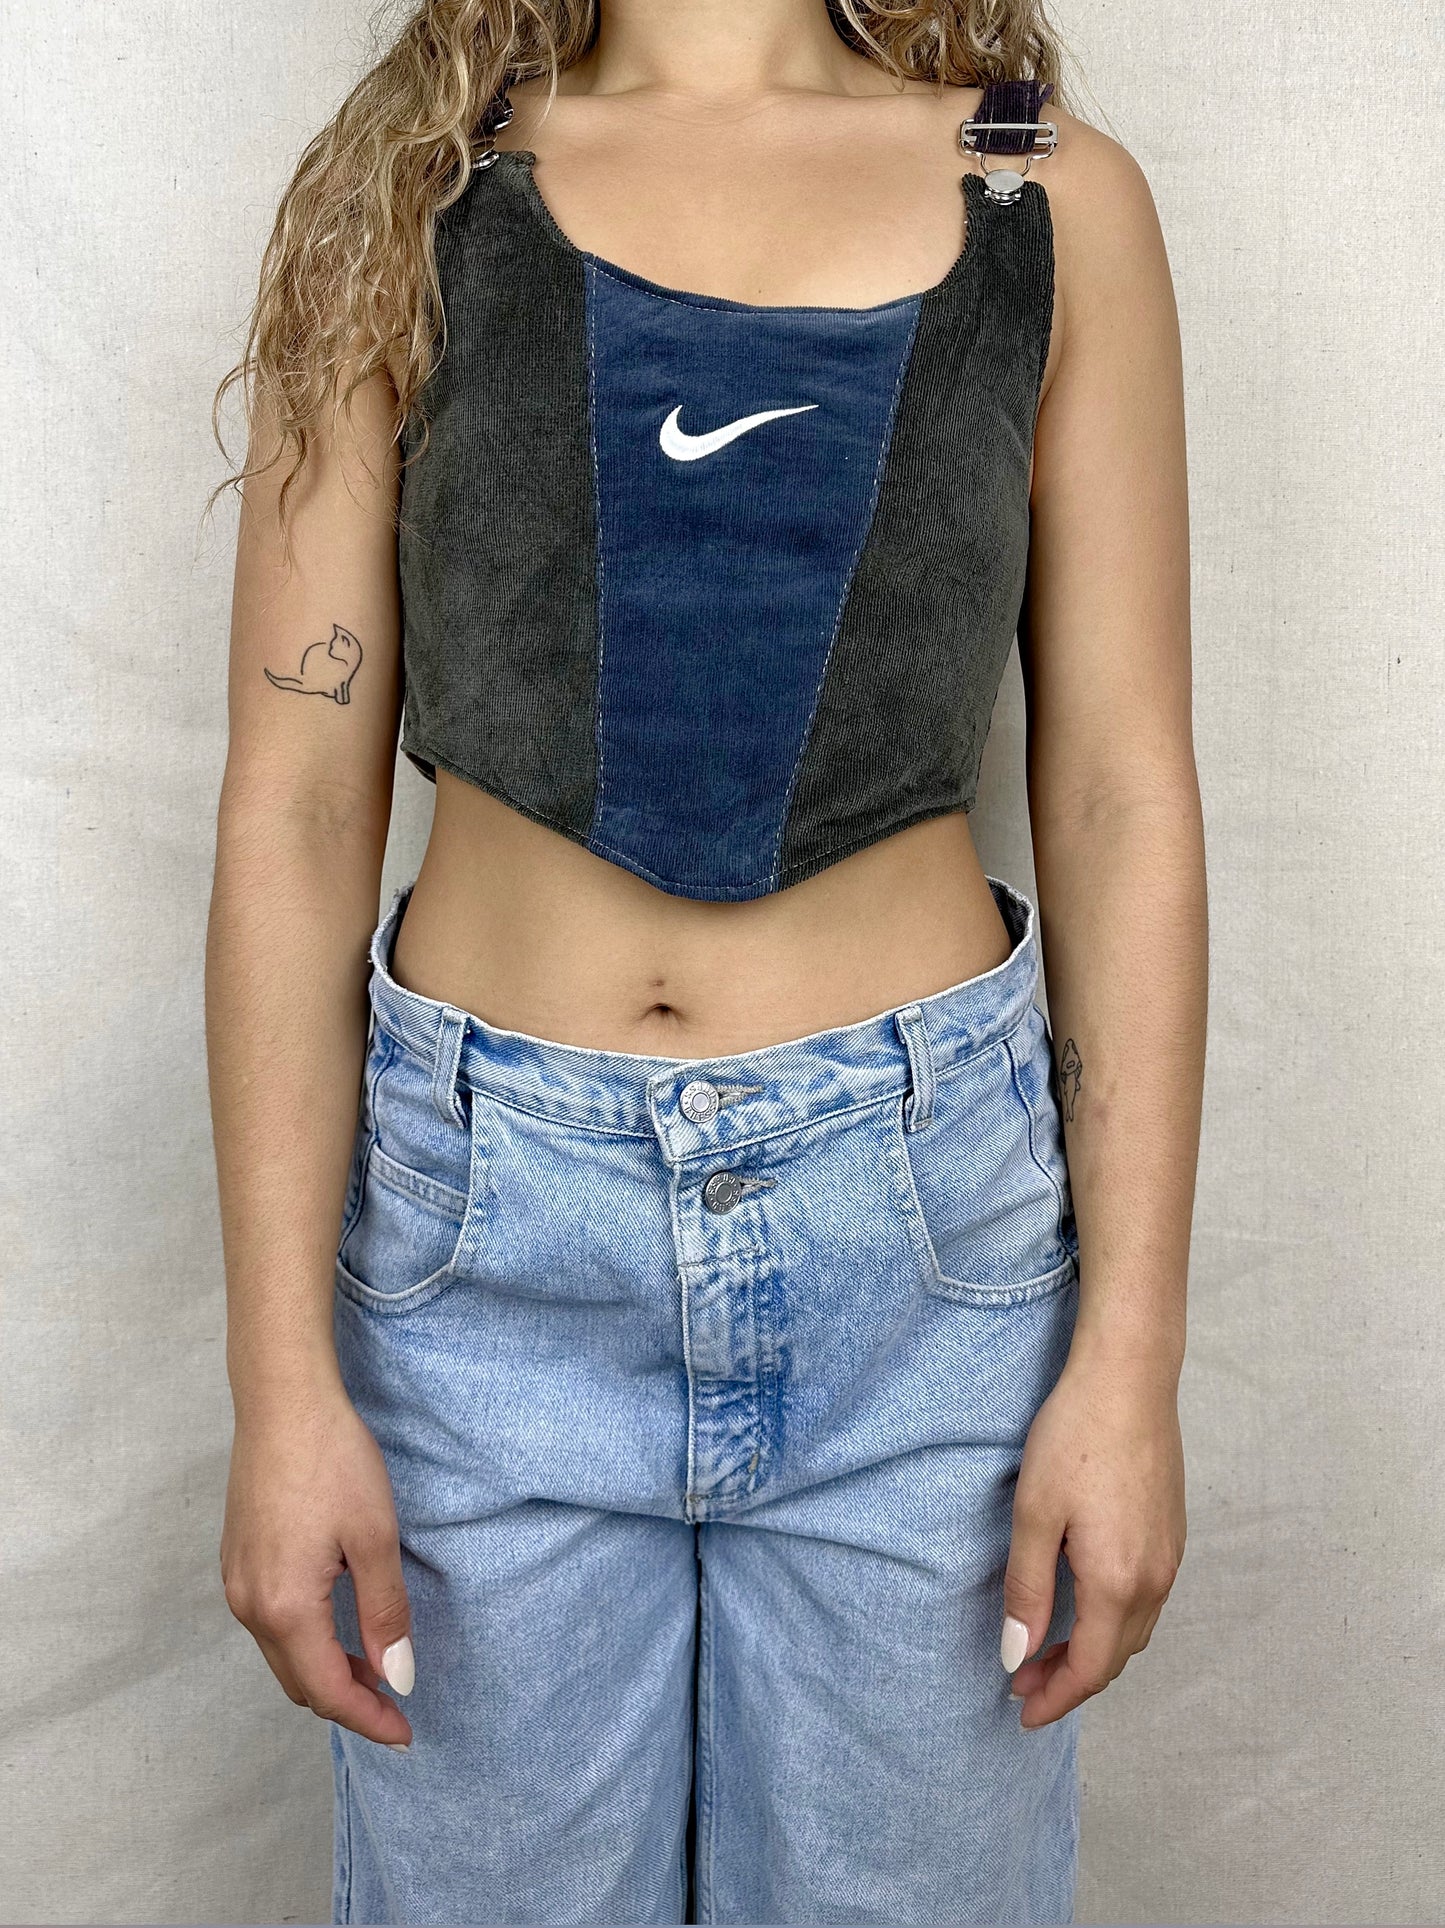 90's Reworked Nike Corduroy Embroidered Vintage Corset Size 8